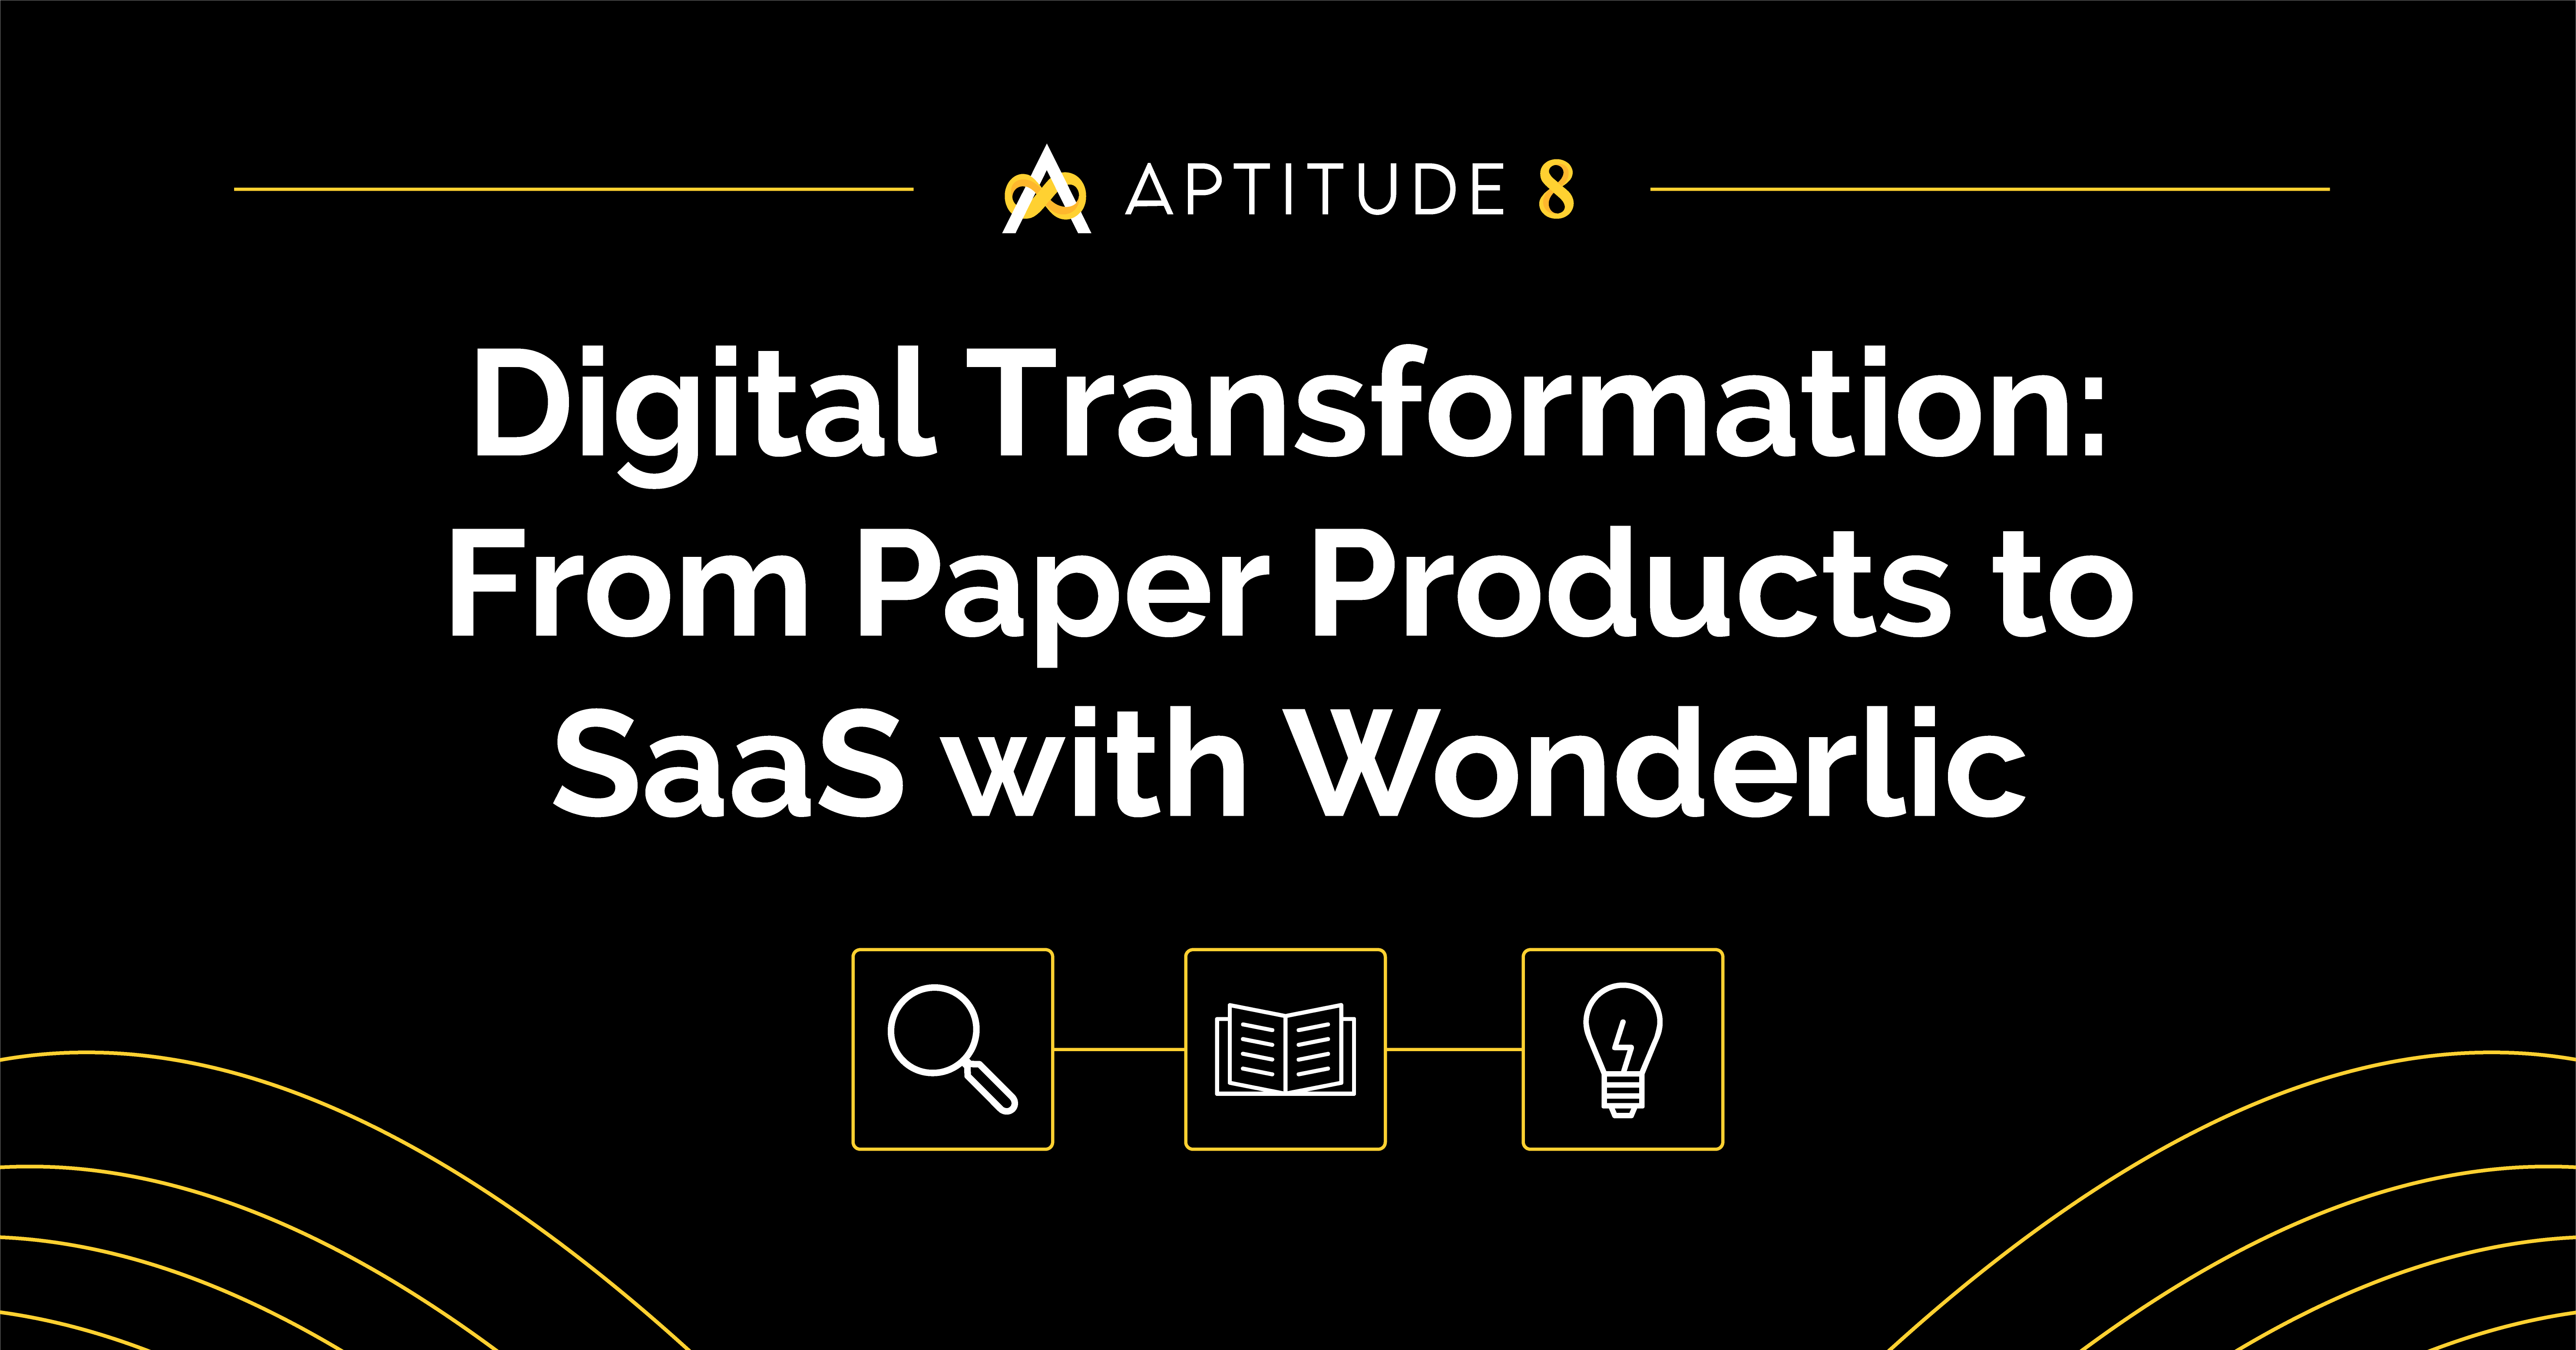 Digital Transformation: From Paper Products to SaaS with Wonderlic